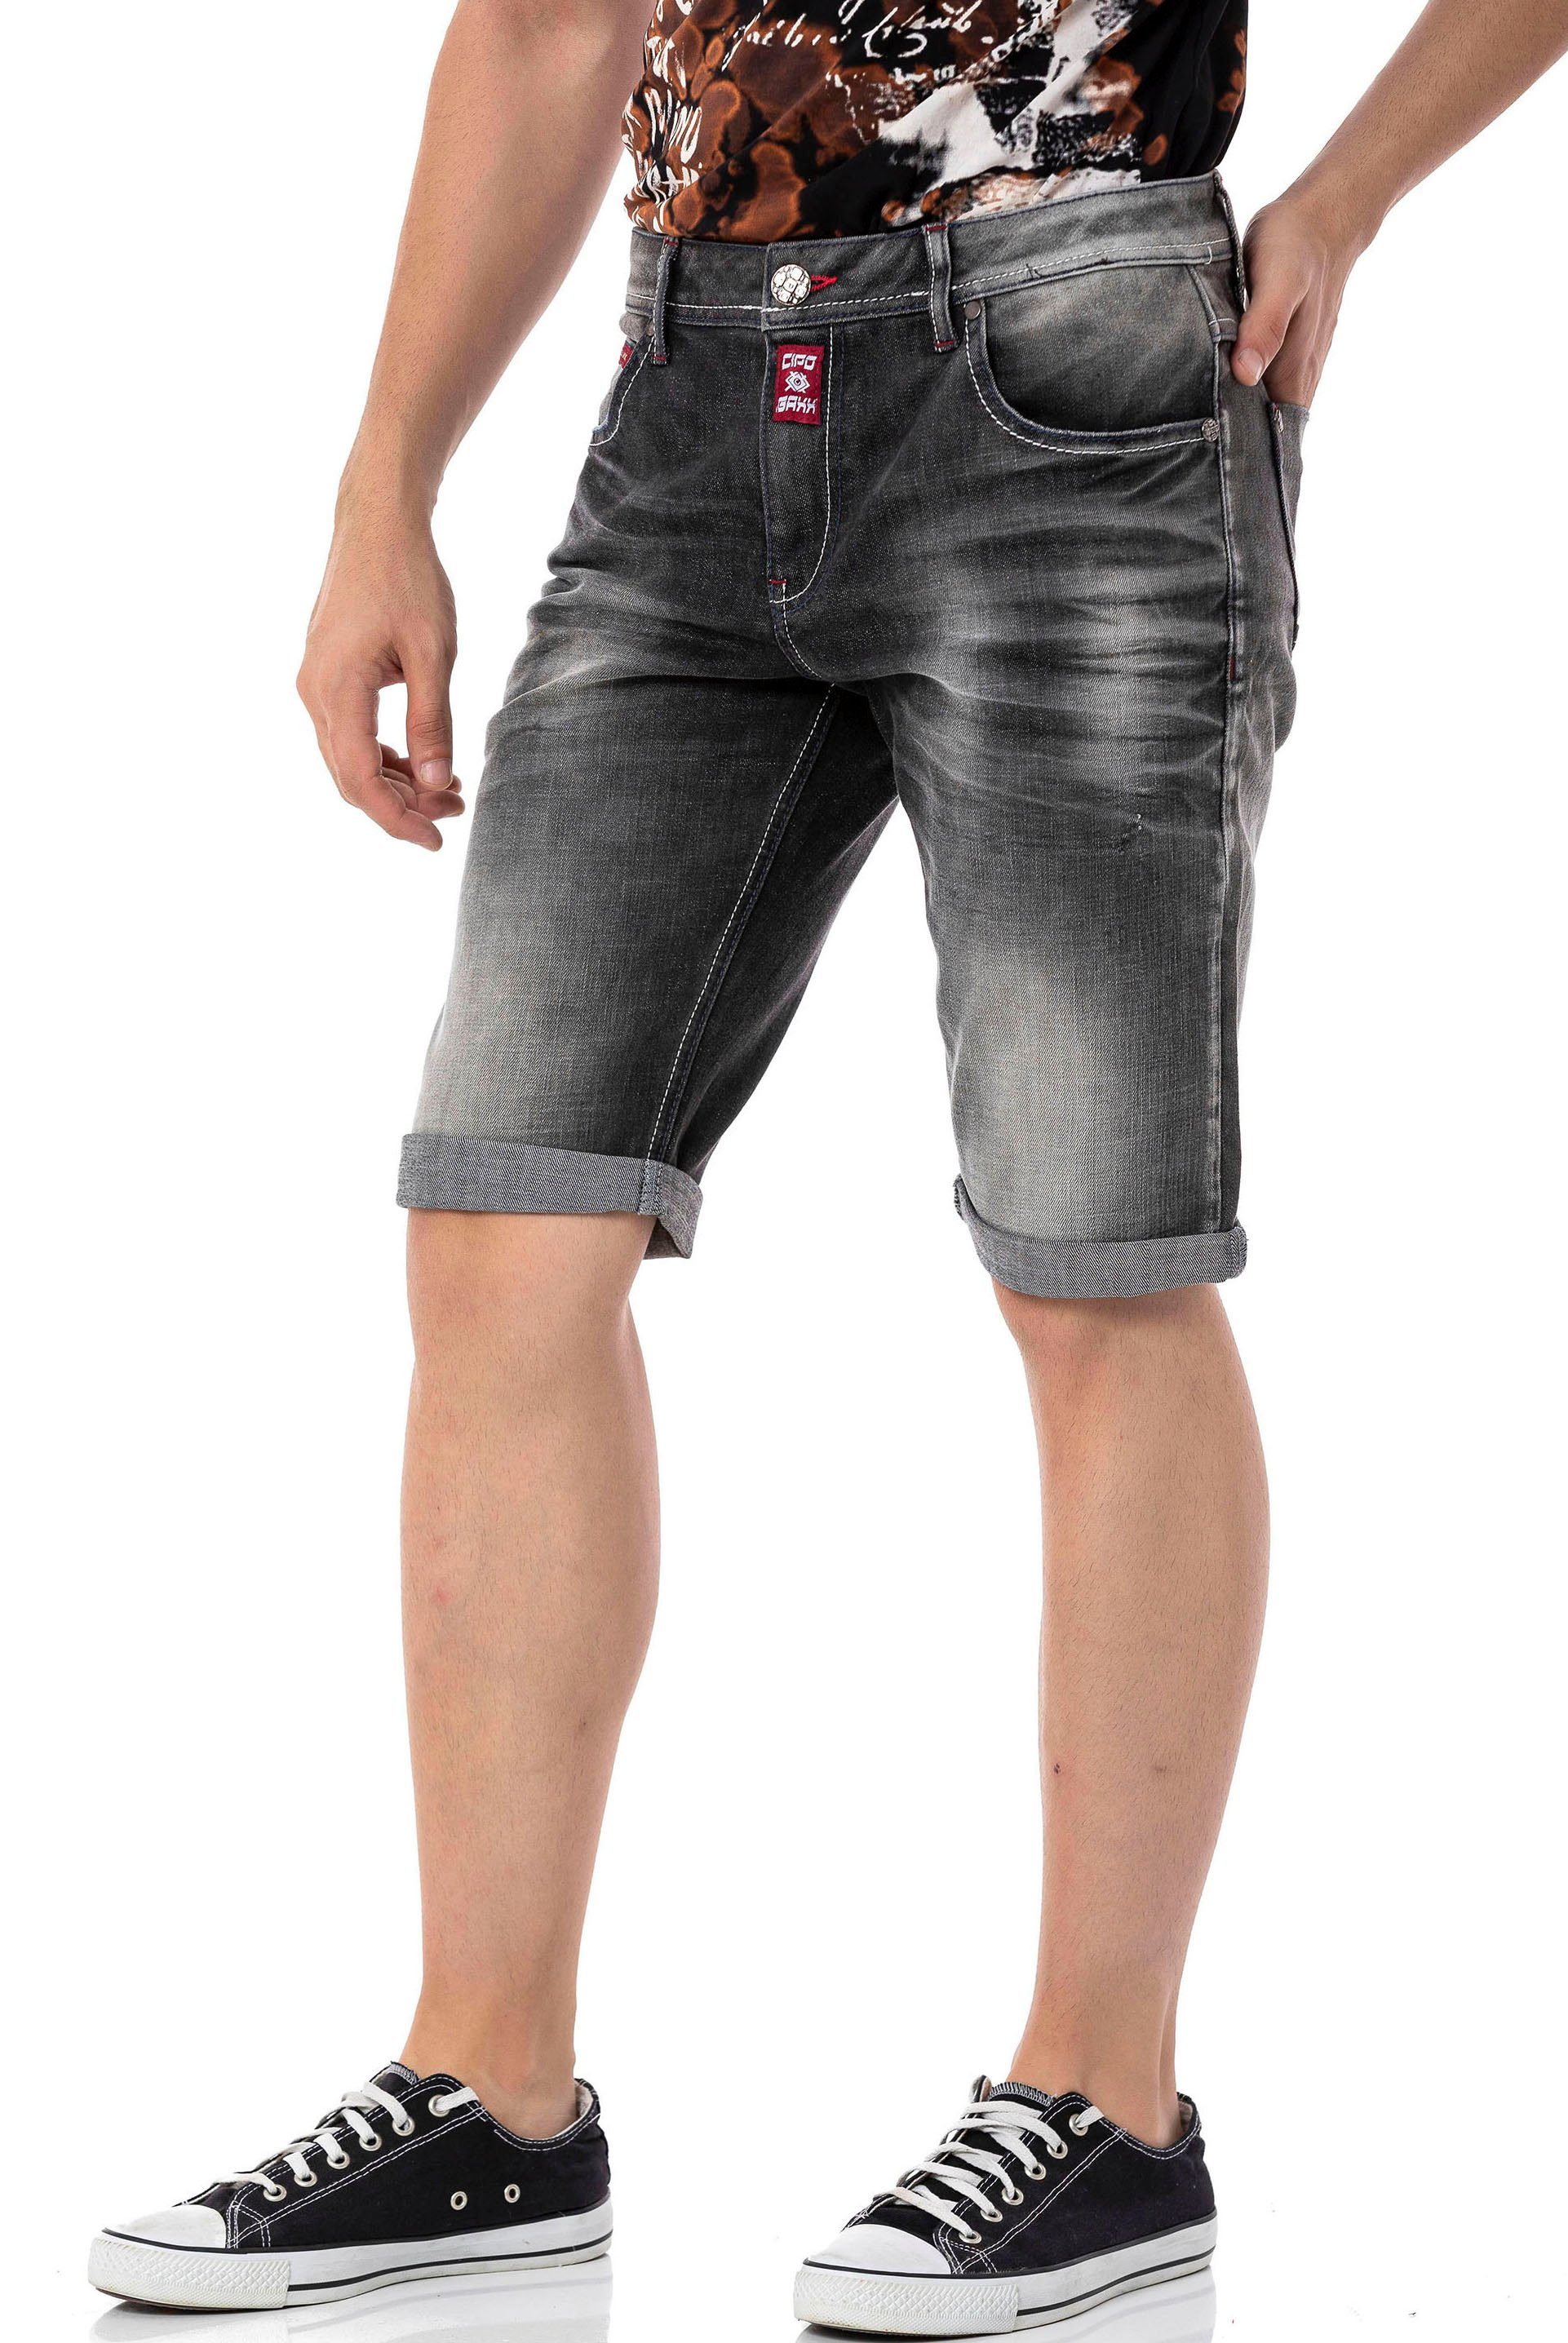 Cipo & Baxx Jeansshorts black used